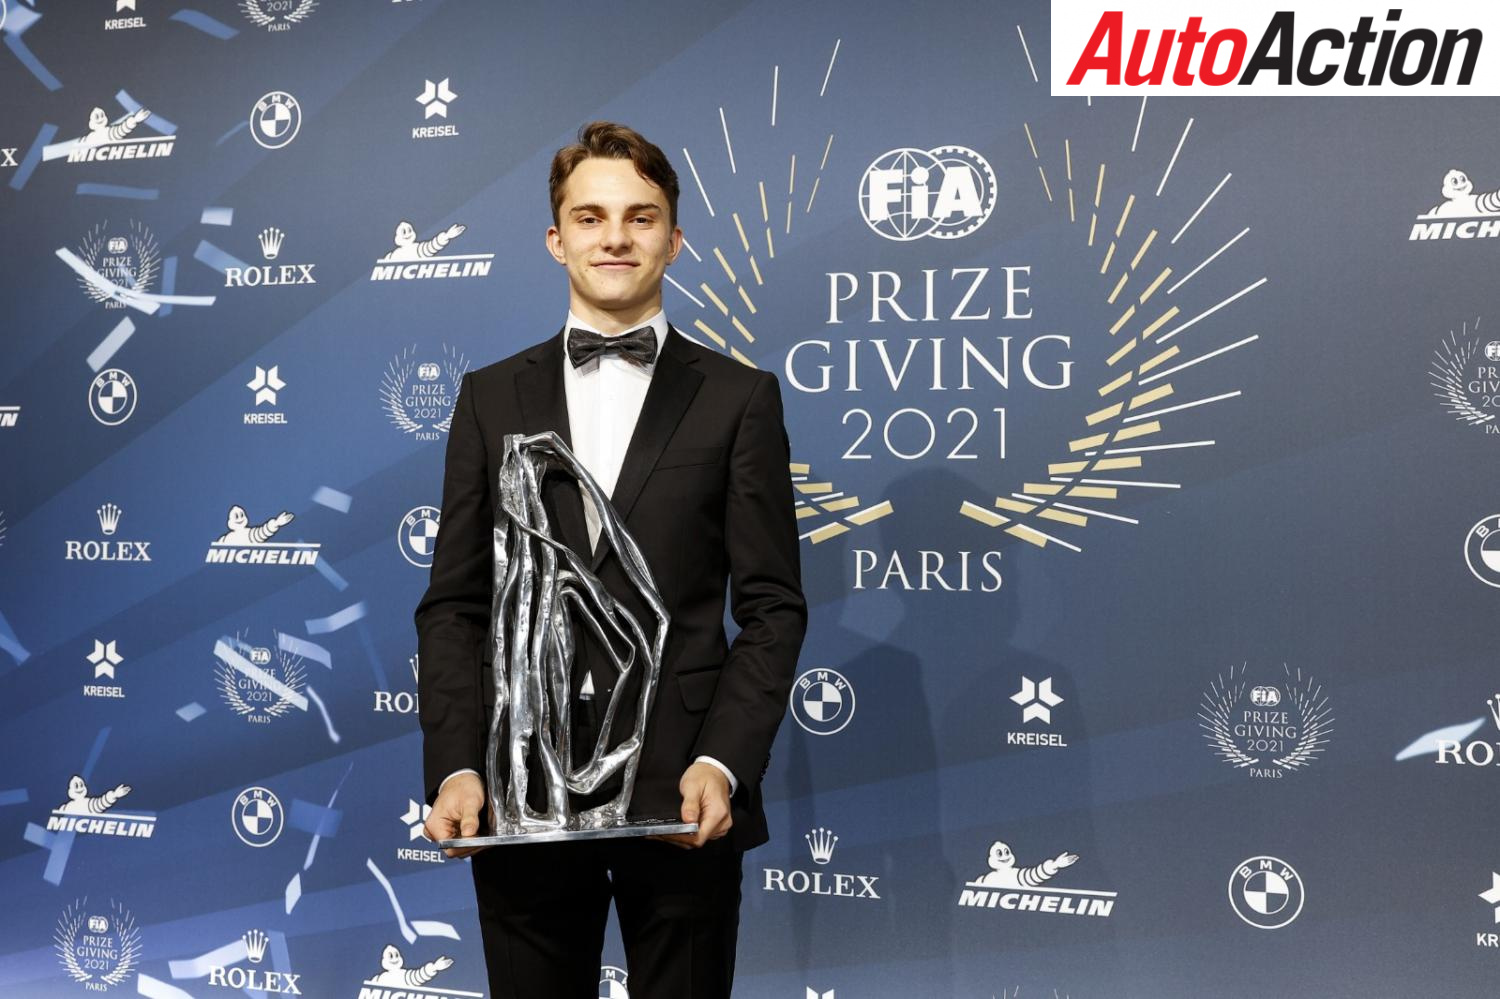 PIASTRI CROWNED FIA ROOKIE OF THE YEAR